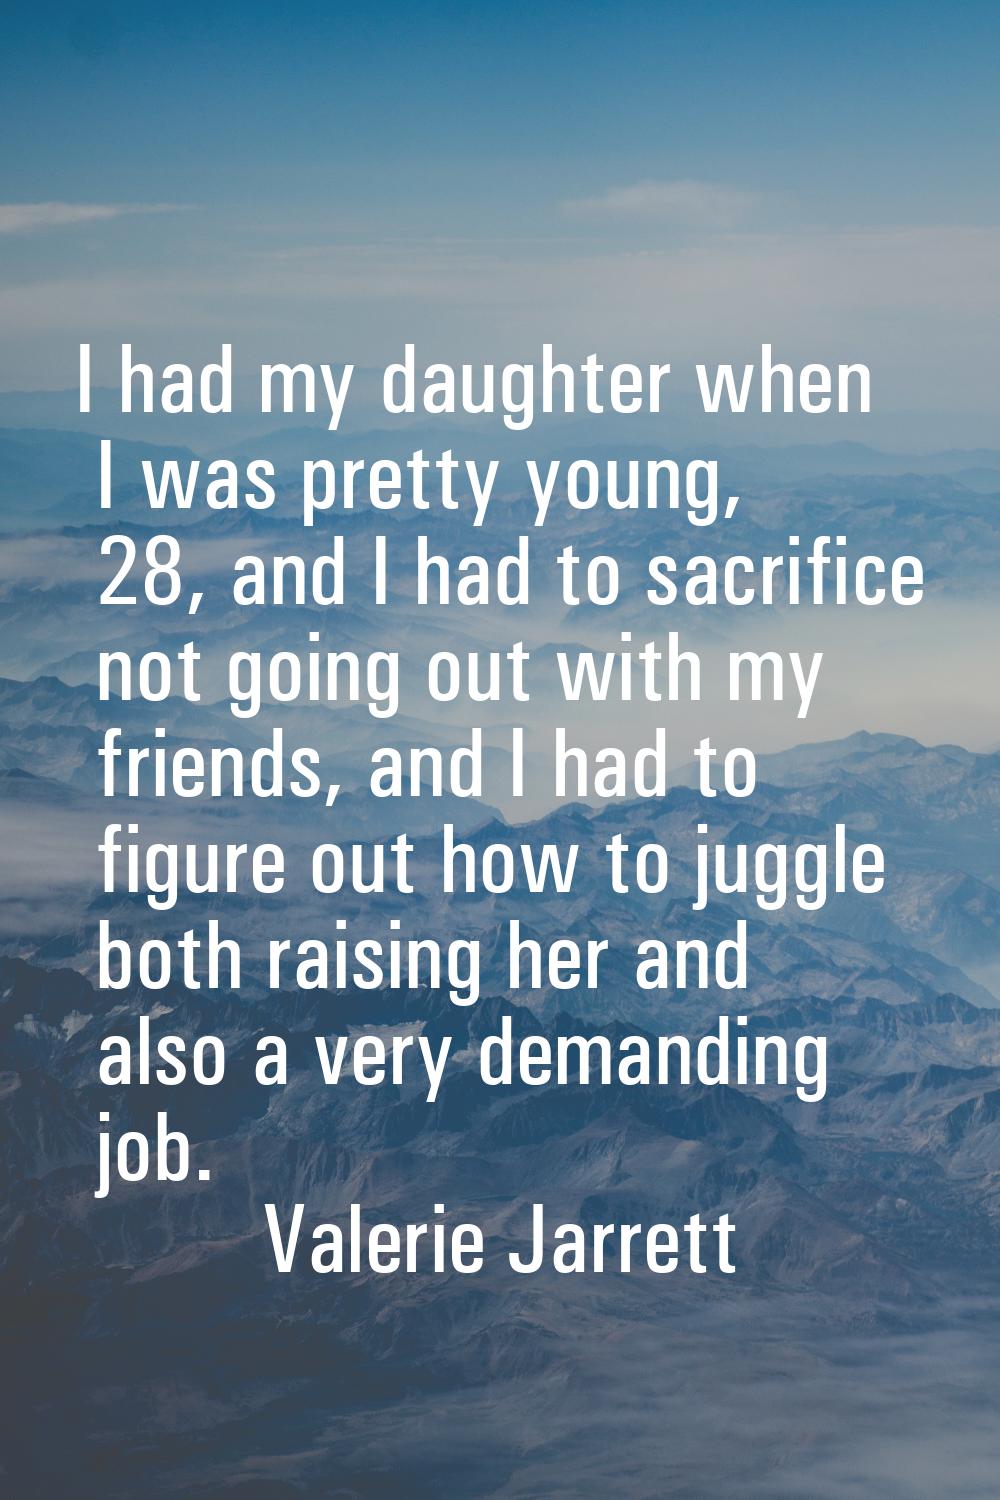 I had my daughter when I was pretty young, 28, and I had to sacrifice not going out with my friends